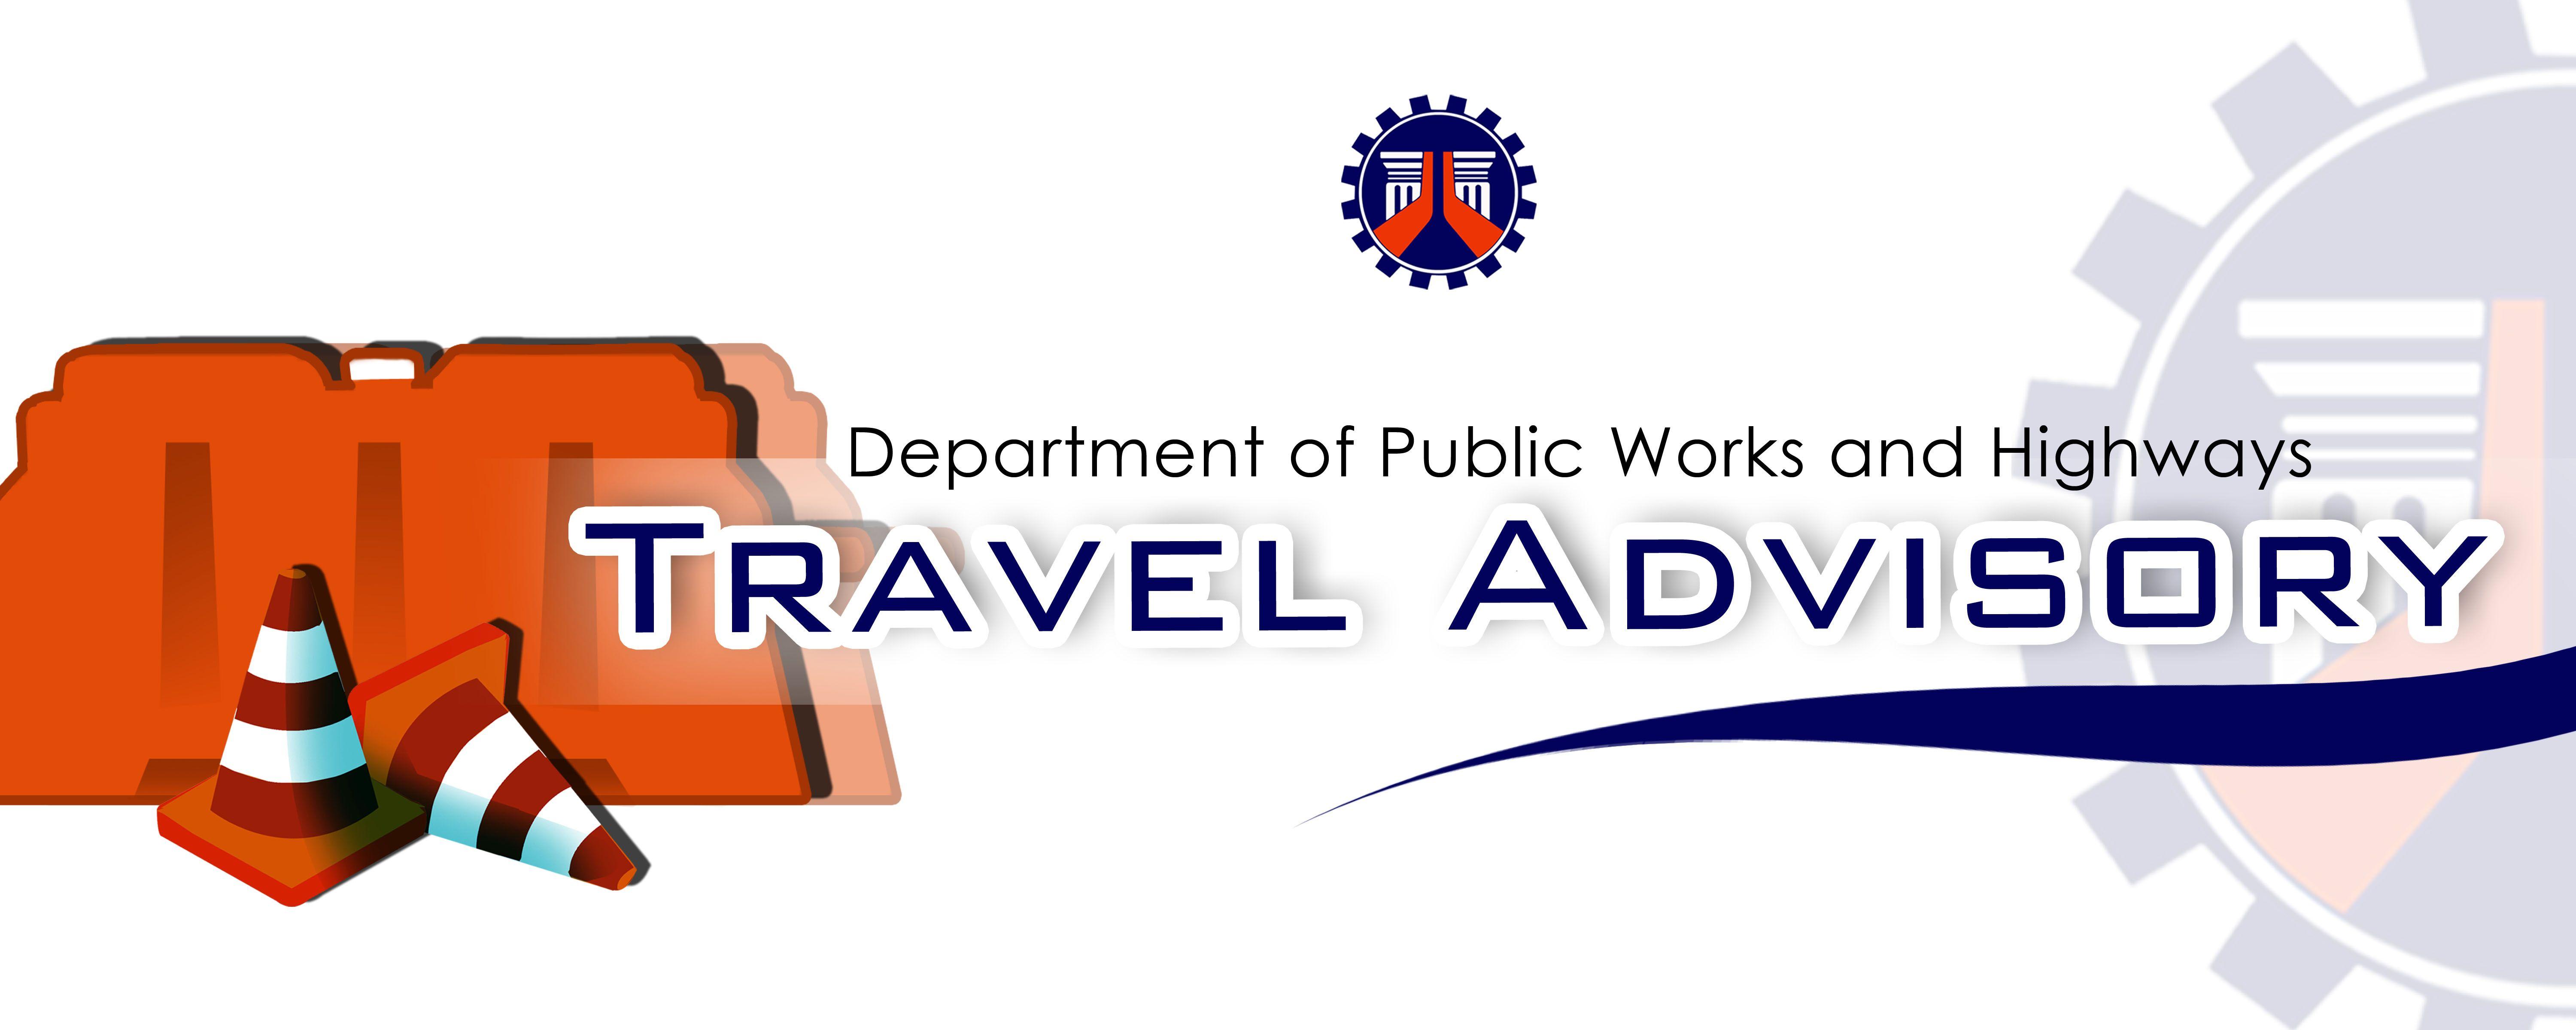 DPWH Logo - News. Department of Public Works and Highways